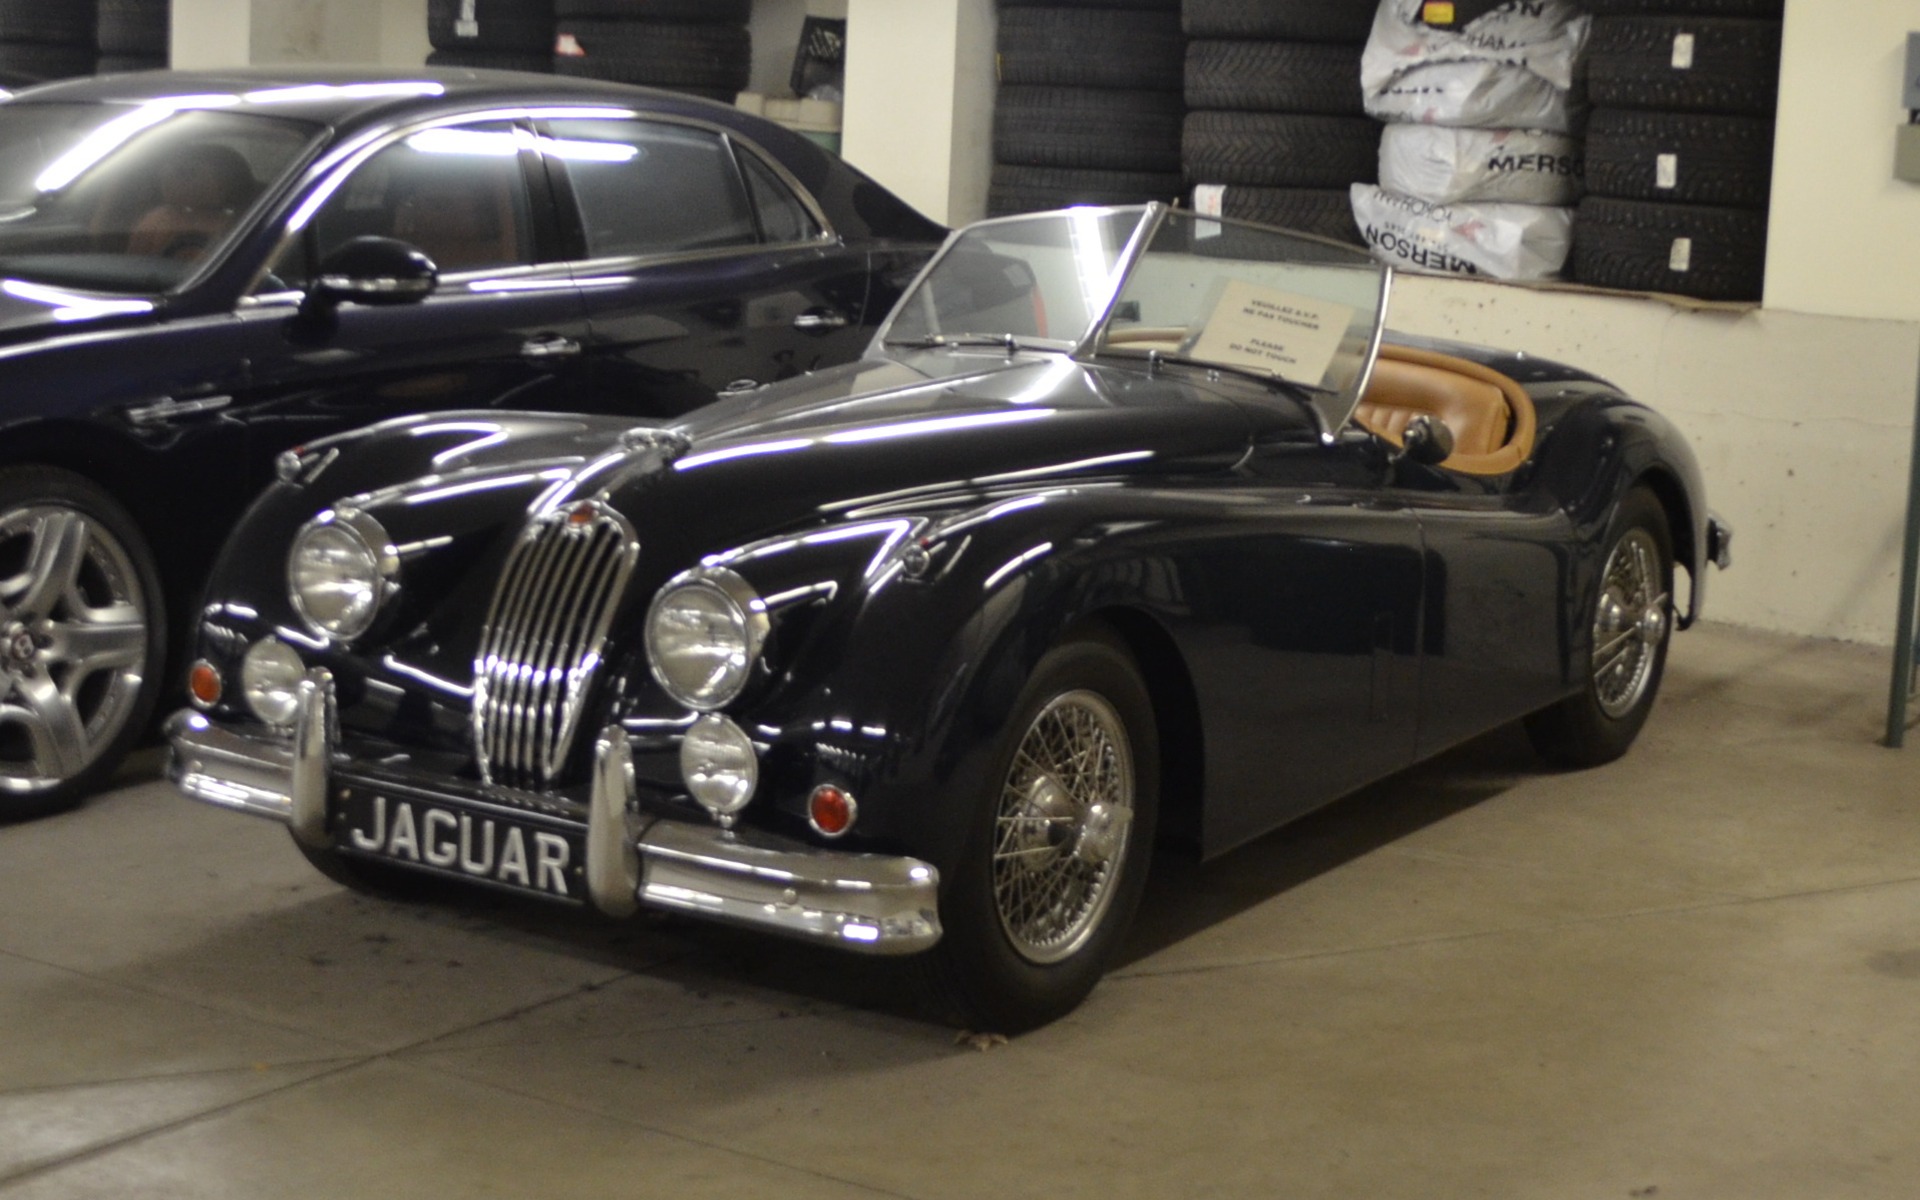 The boss' toy: a Jaguar XK140 in perfect condition.